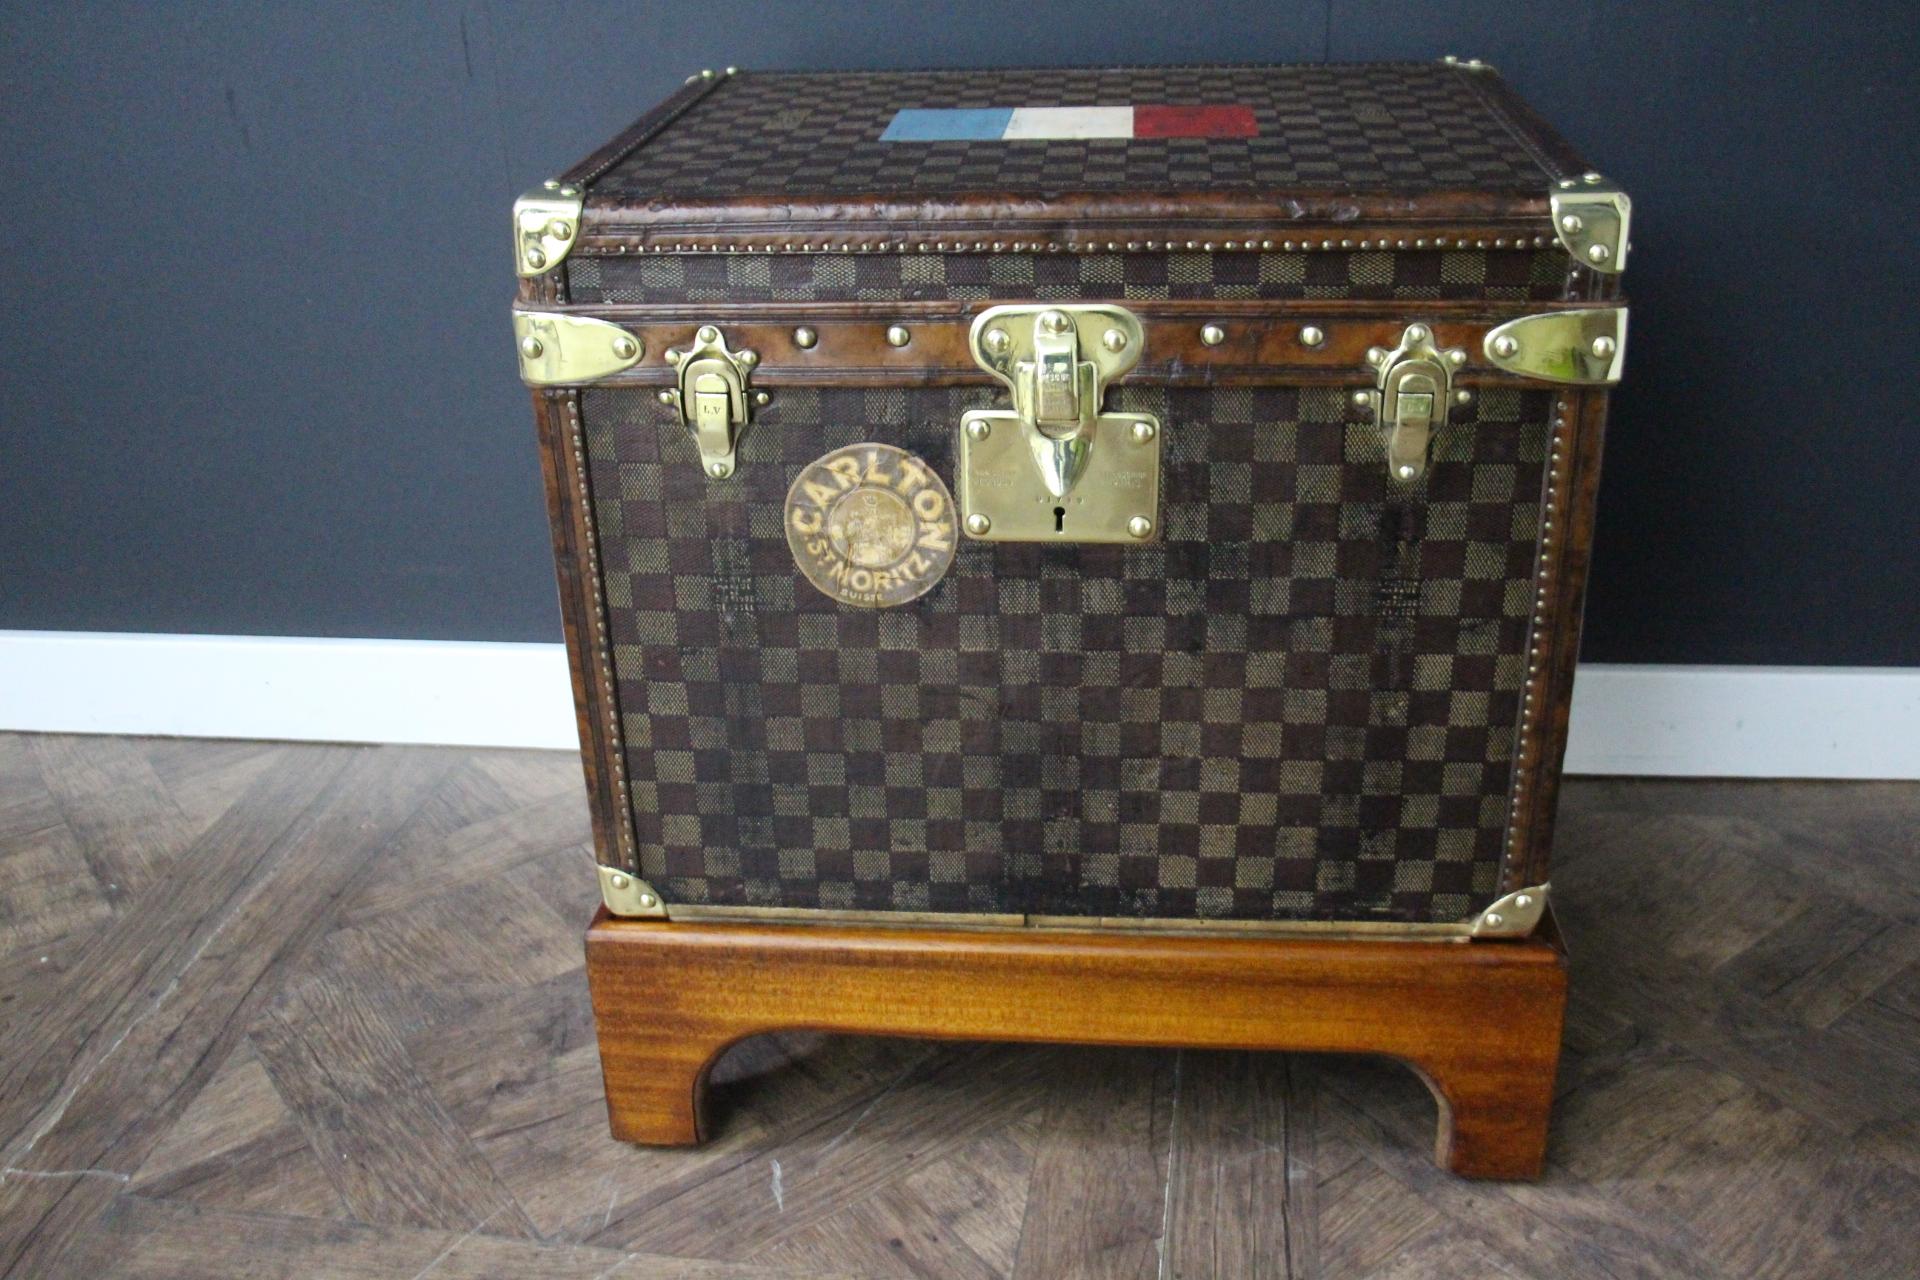 This lovely little Louis Vuitton steamer trunk features the very sought after checkers canvas ,chocolate color leather trim, solid brass corners, locks, and side handles. Its brass locks, studs and side handles are all marked Louis Vuitton.Its brass